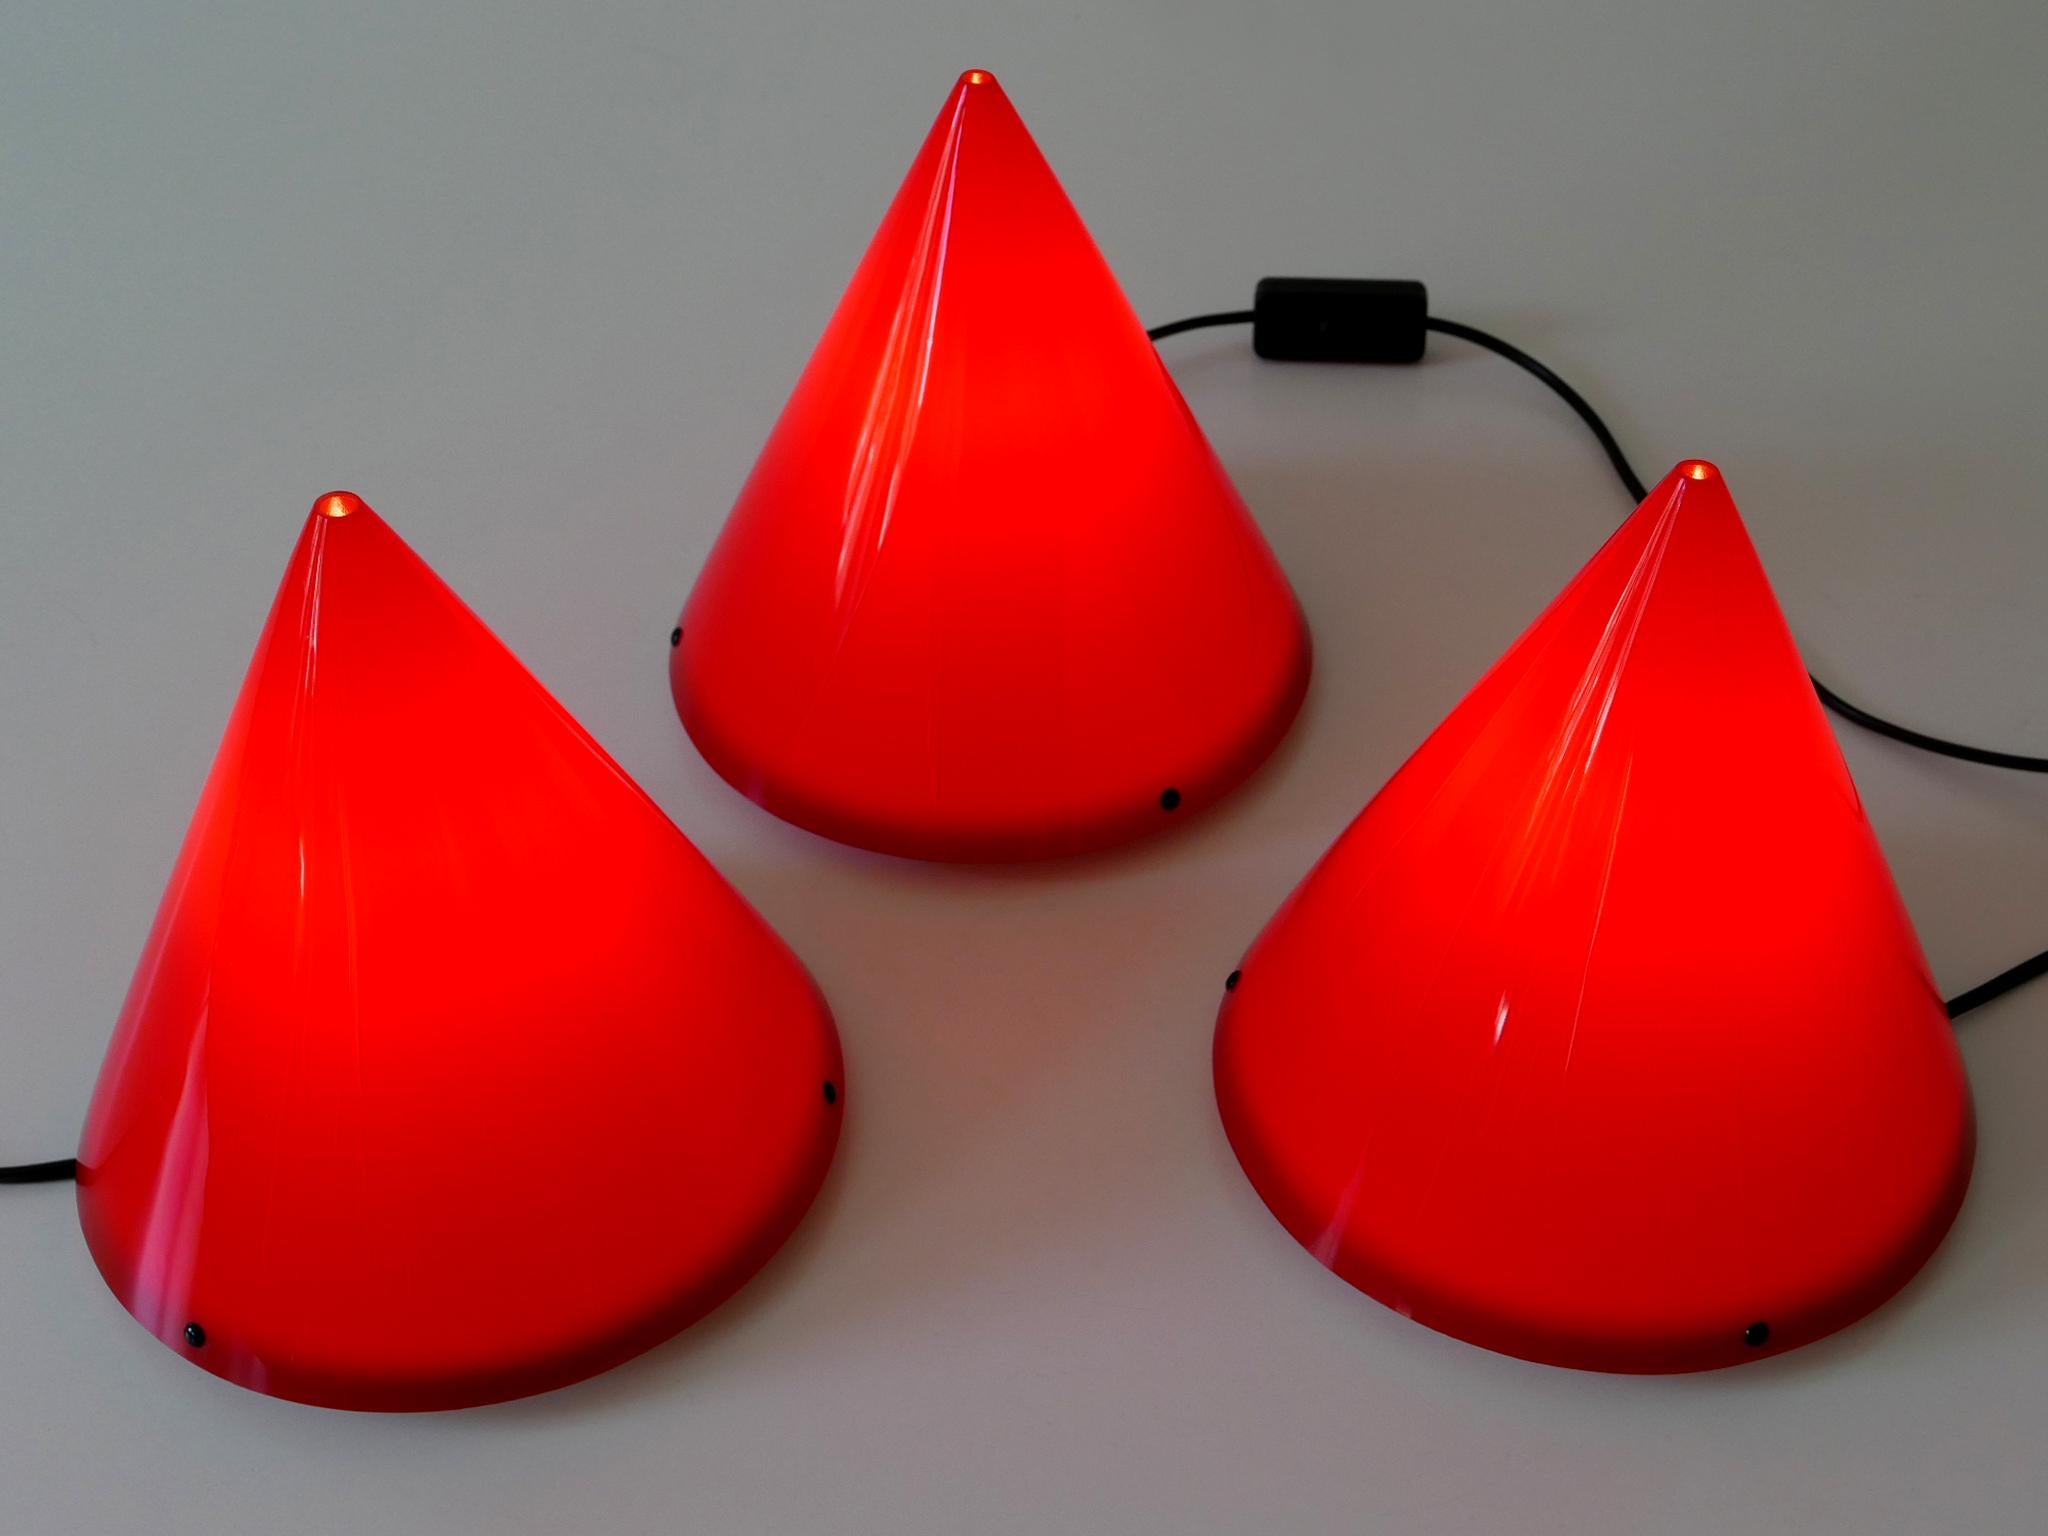 Set of three lovely Modernist table lamps or sconces 'Cone' in red acrylic. Designed by Verner Panton in 1995. Manufactured by Poly Thema in a small edition (300 of each color). Each cone will be mounted to the white base by three black circular